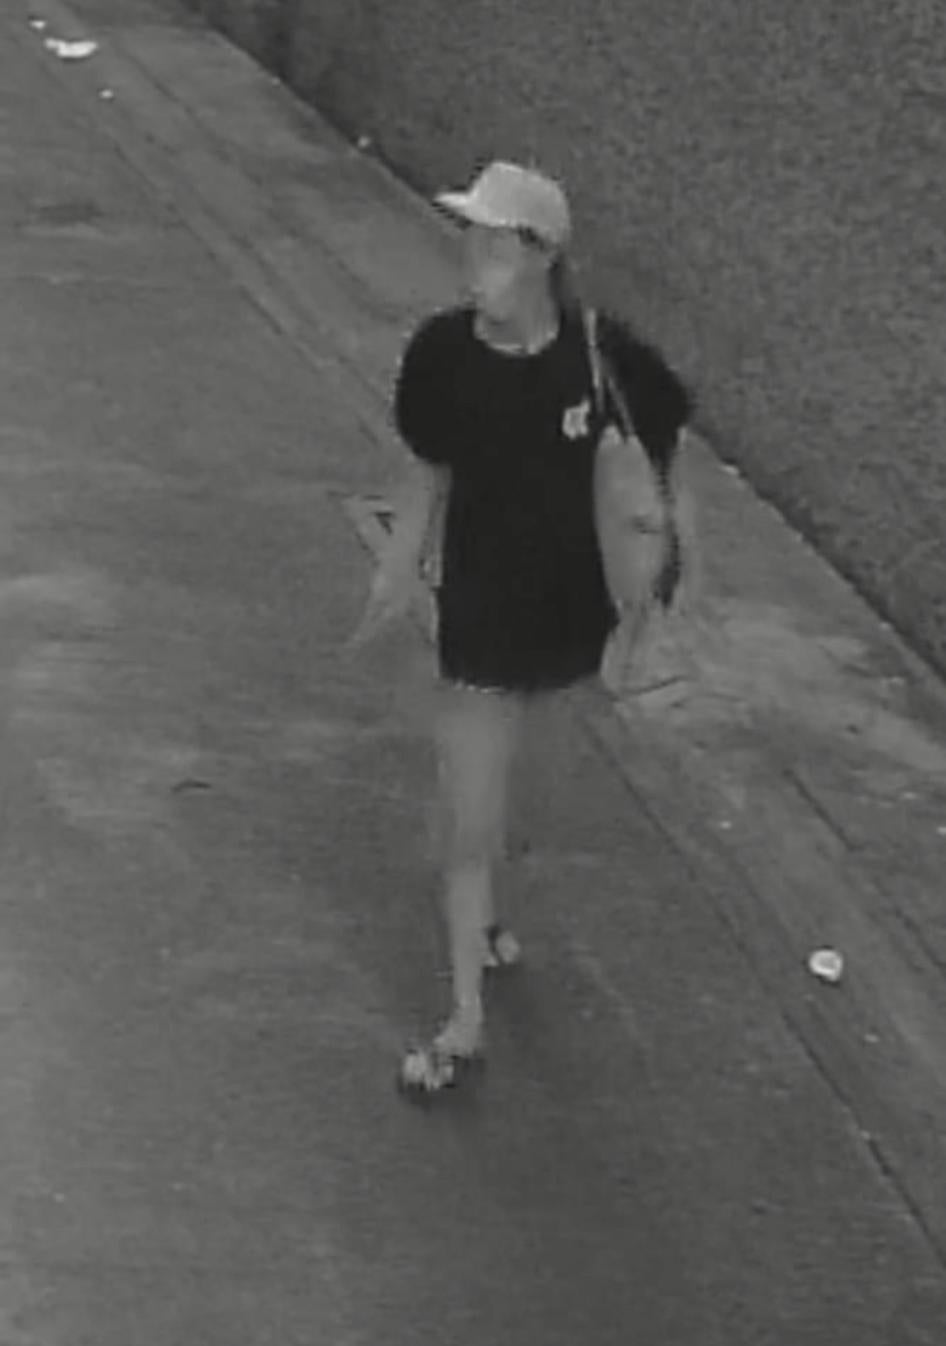 Photo captured on a security camera of the alleged assailant, a woman wearing a mask and a black t-shirt.